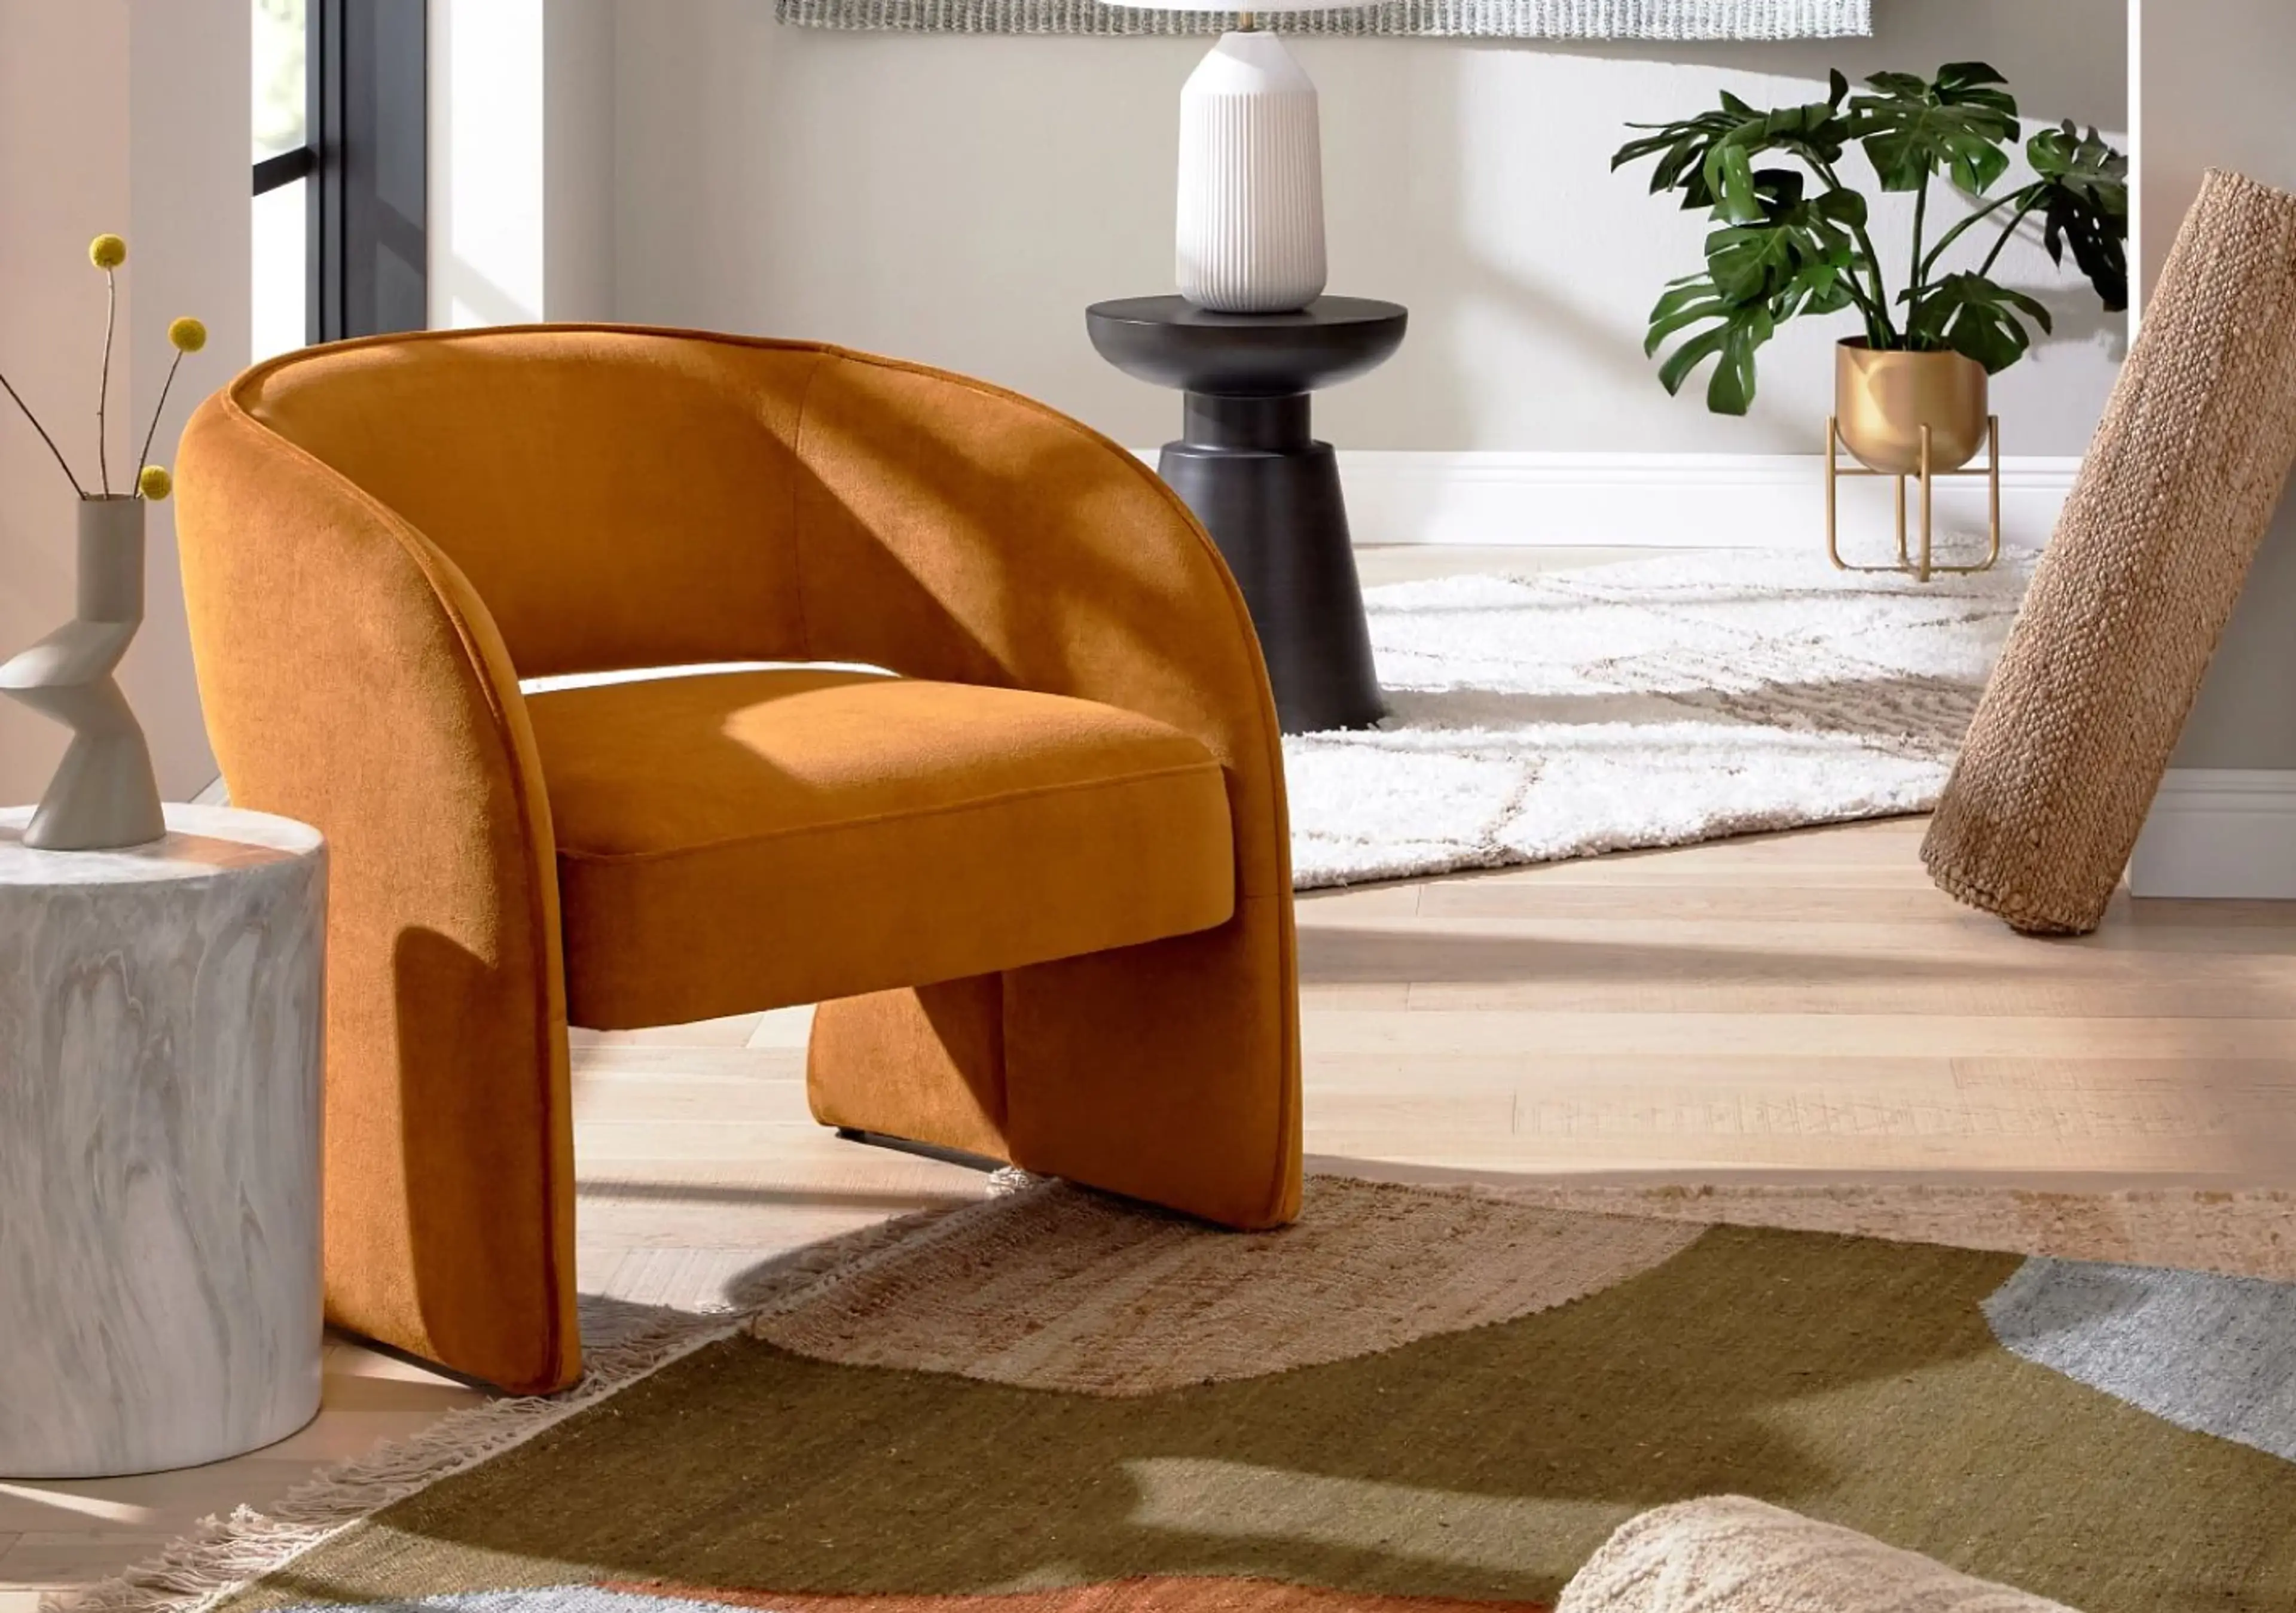 2. Curved Accent Chair